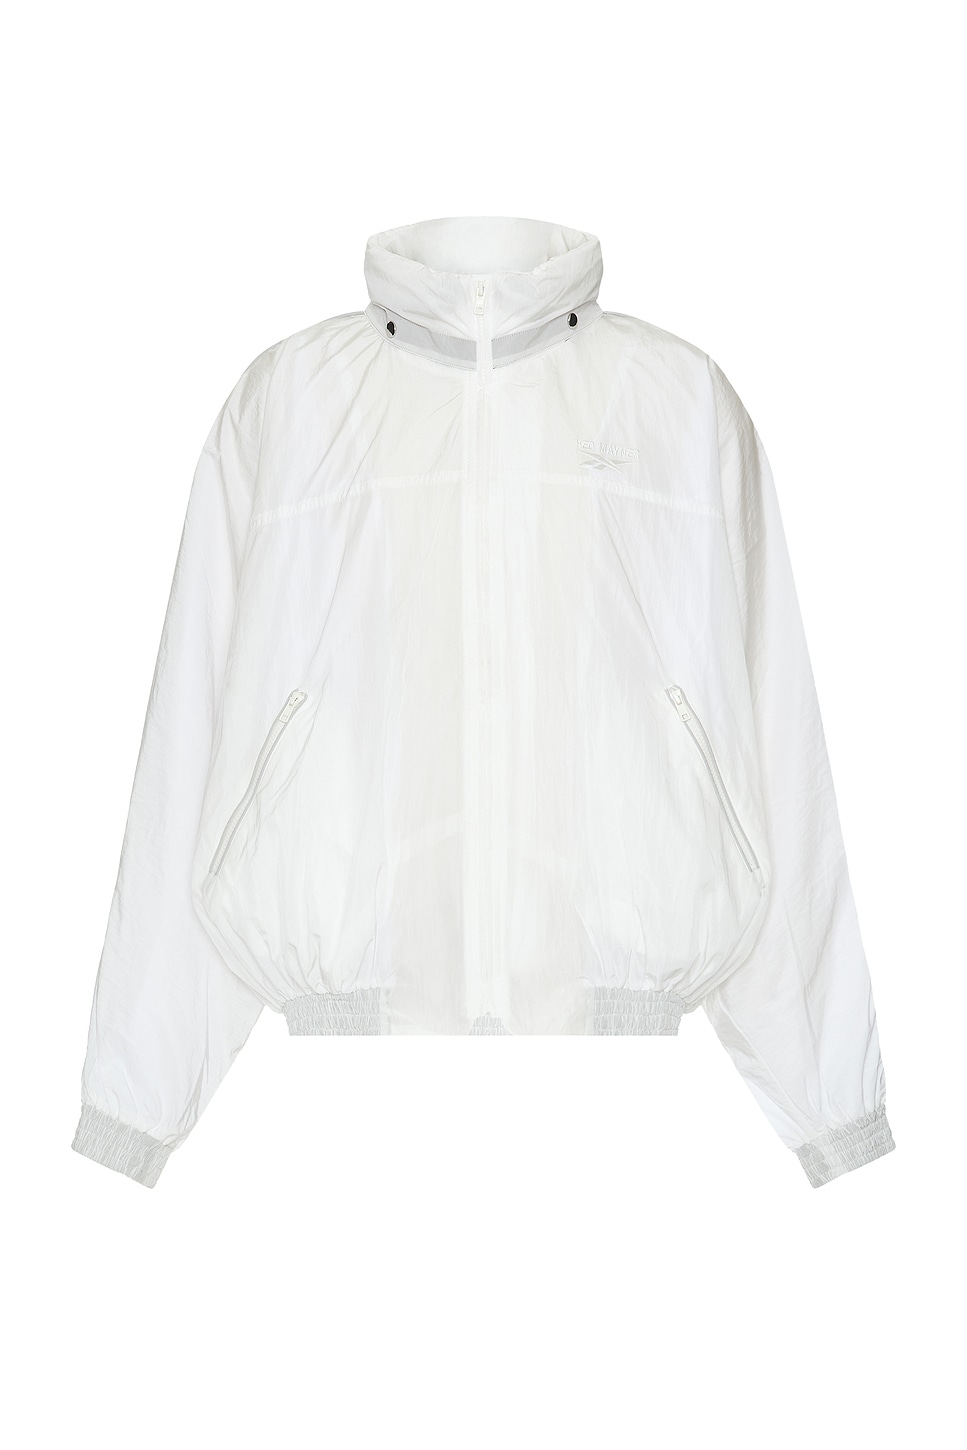 Image 1 of Reebok x Hed Mayner Hooded Jacket in White